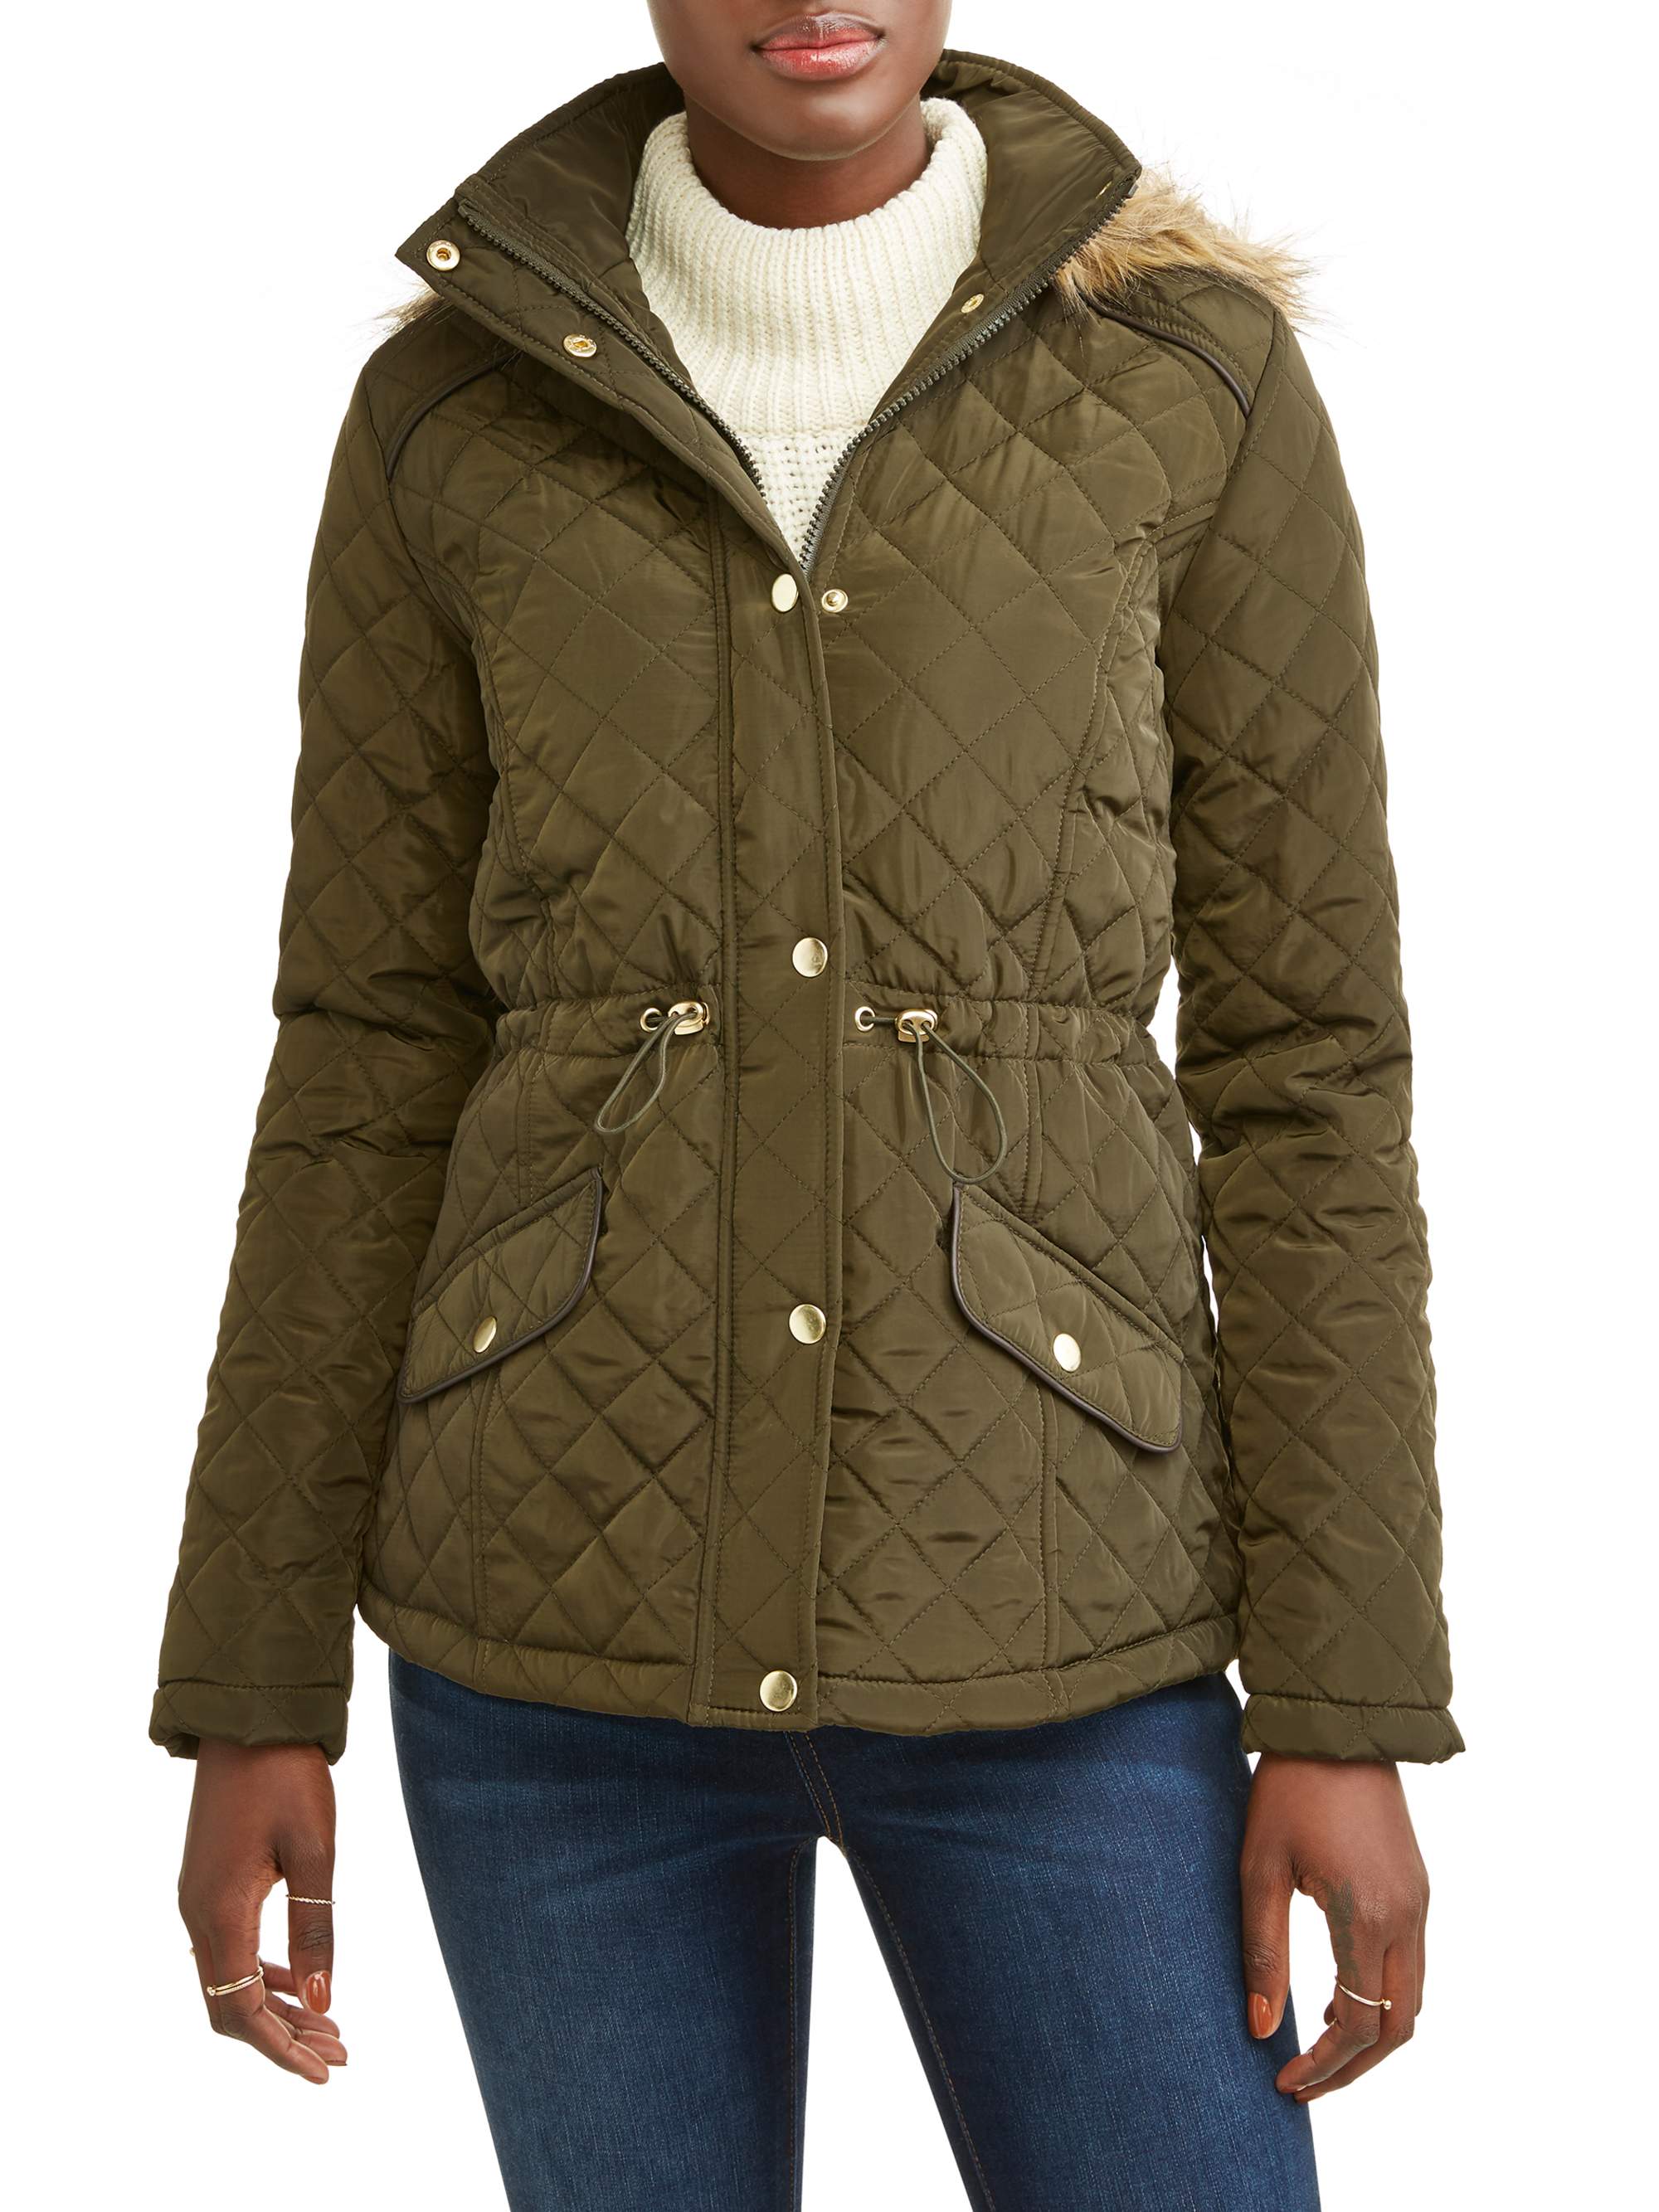 Women's Quilted Anorack With Faux Fur Hood - image 1 of 4